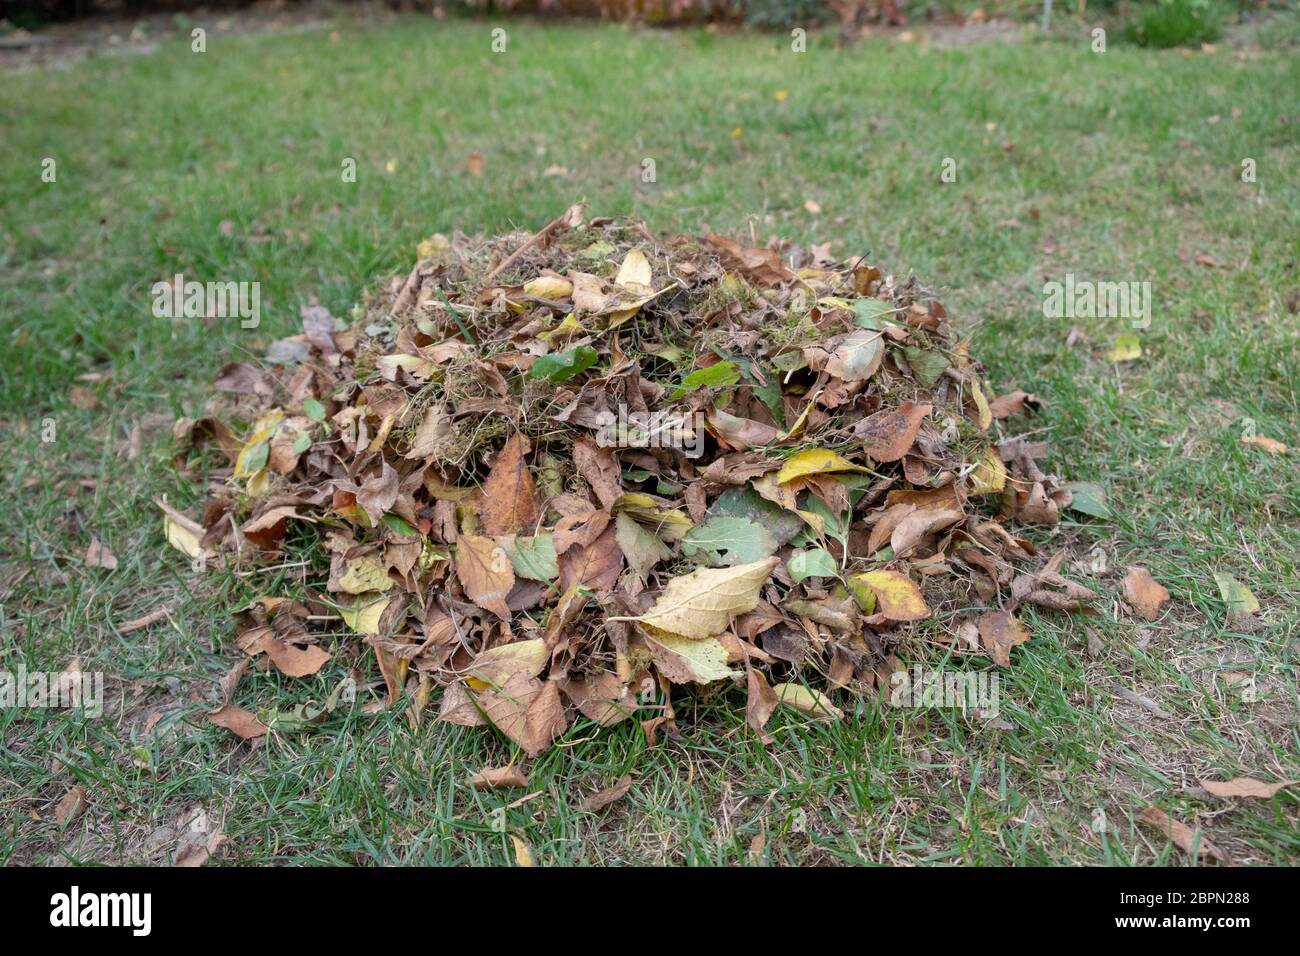 A Heap Of Dried Leaves On The Ground · Free Stock Photo